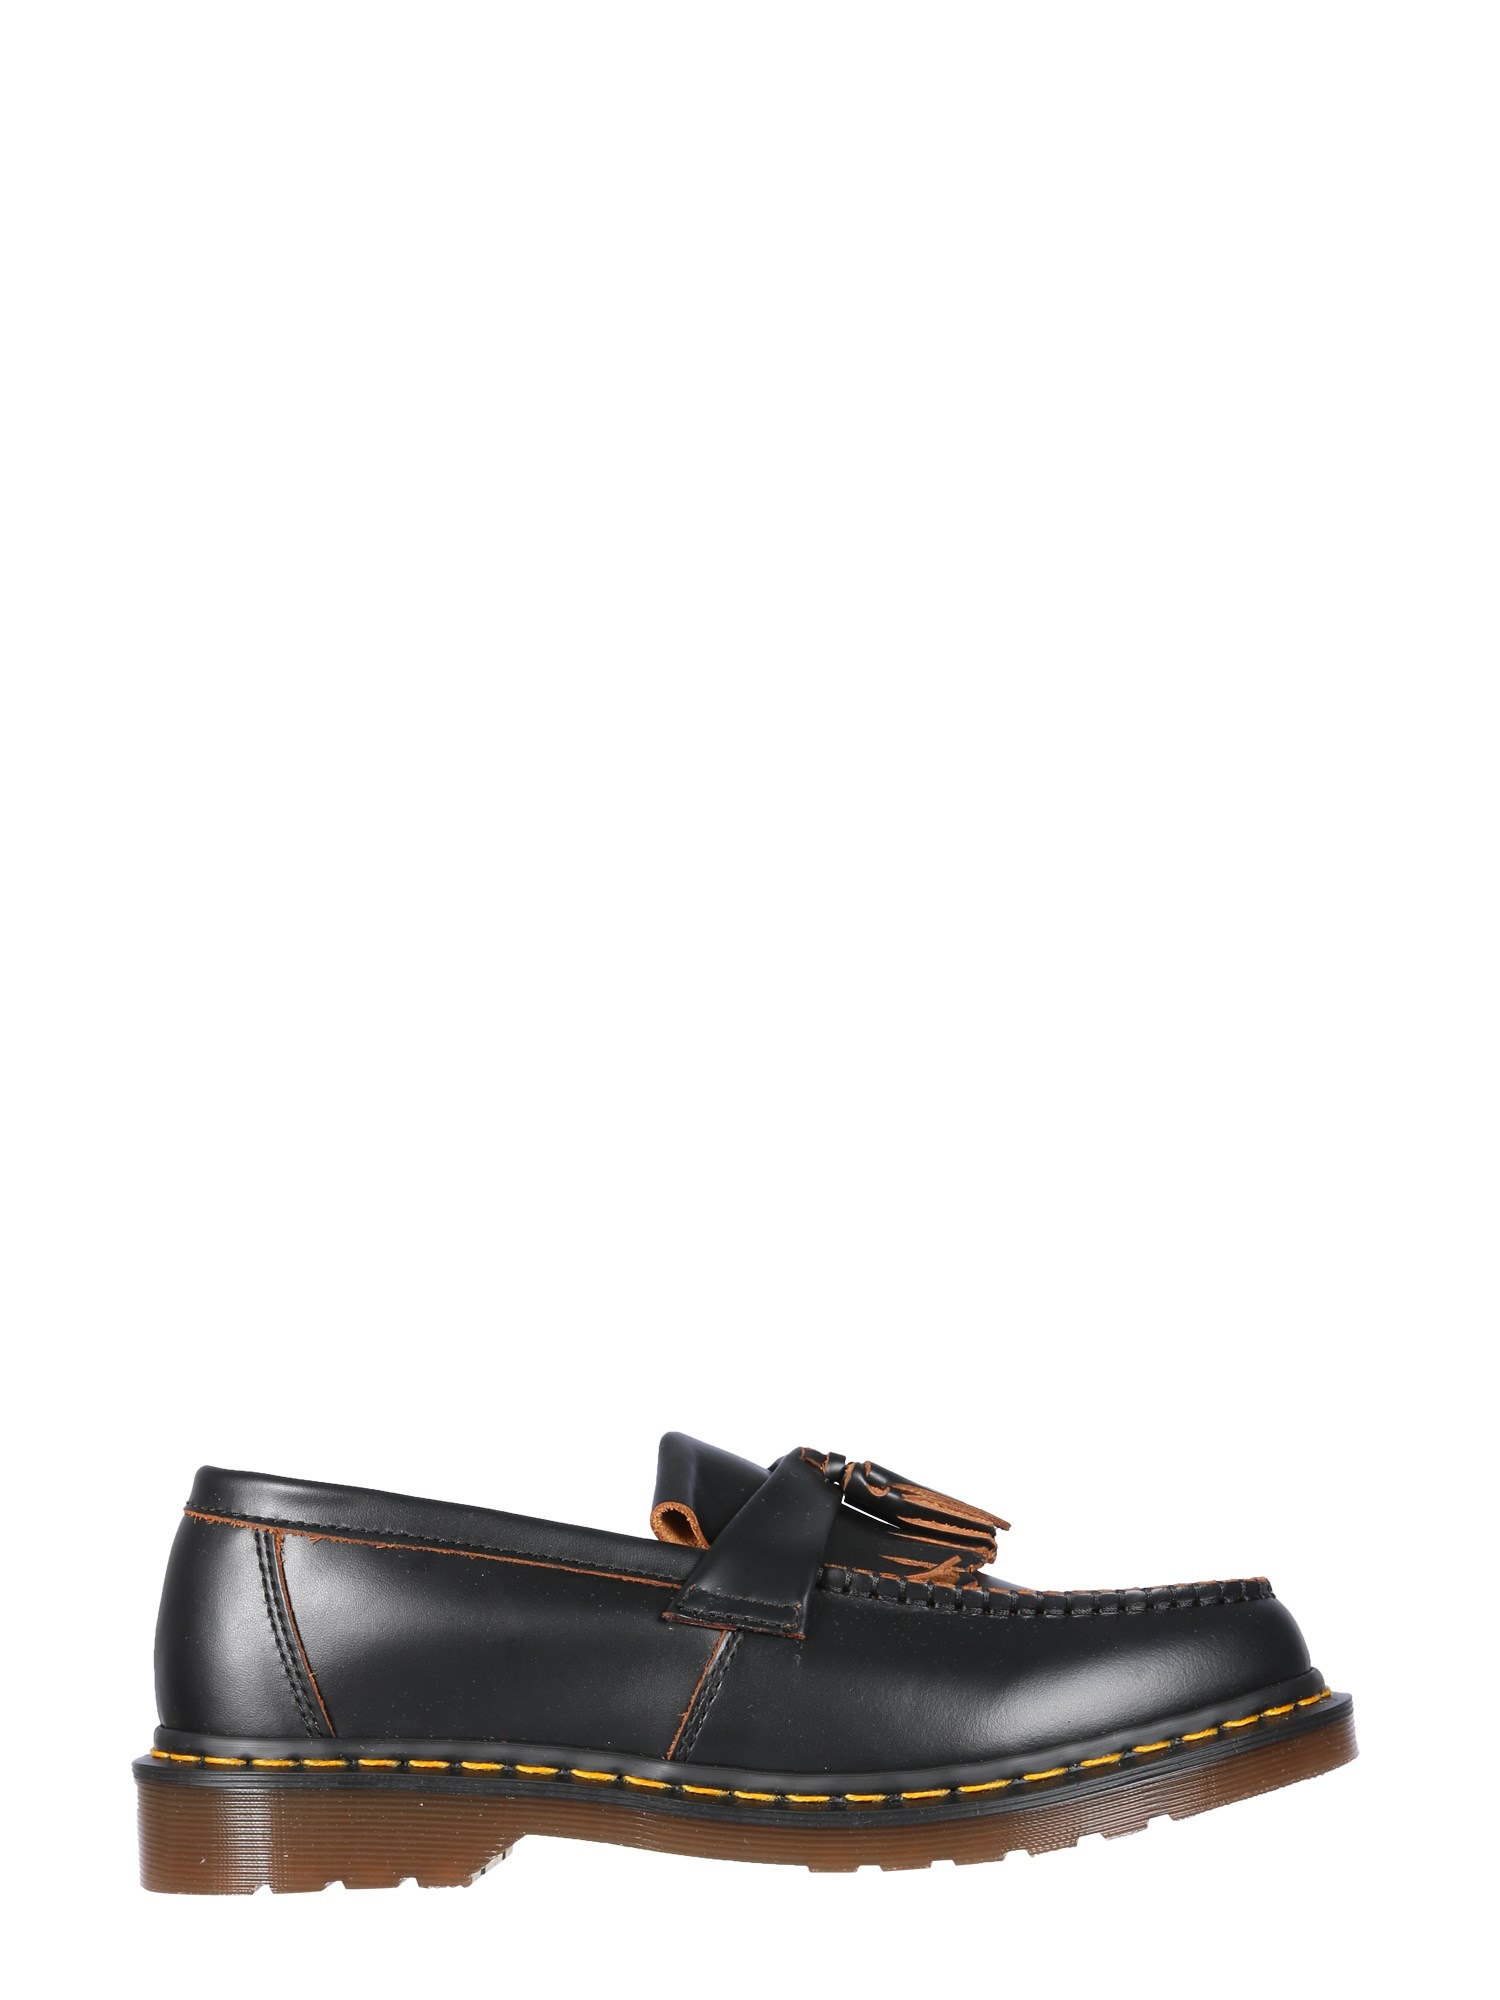 Buy dr martens vintage adrian loafers- find codes and free shipping